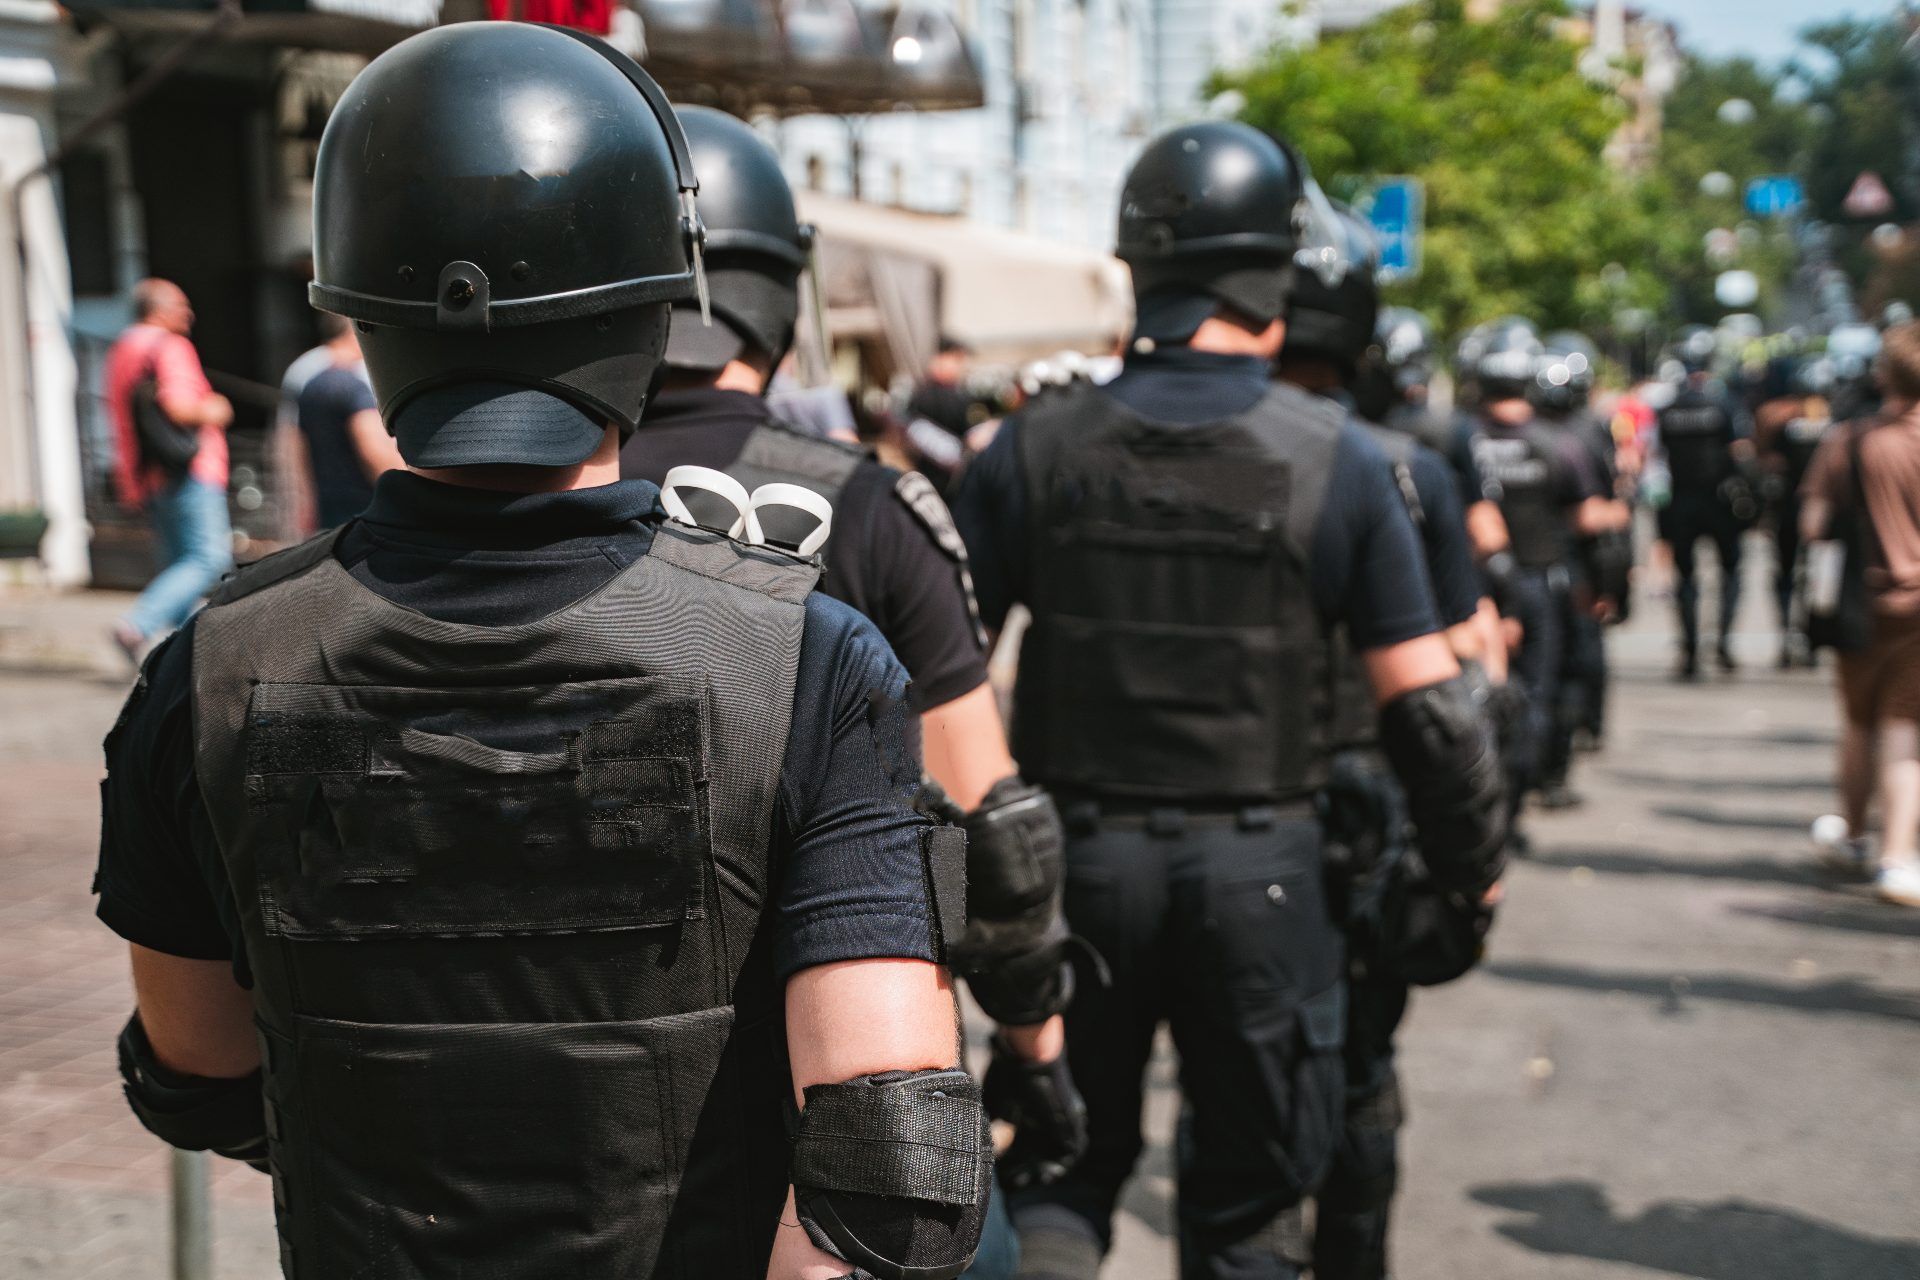 Police, seen from behind, wear riot gear to work during a protest - racial discrimination